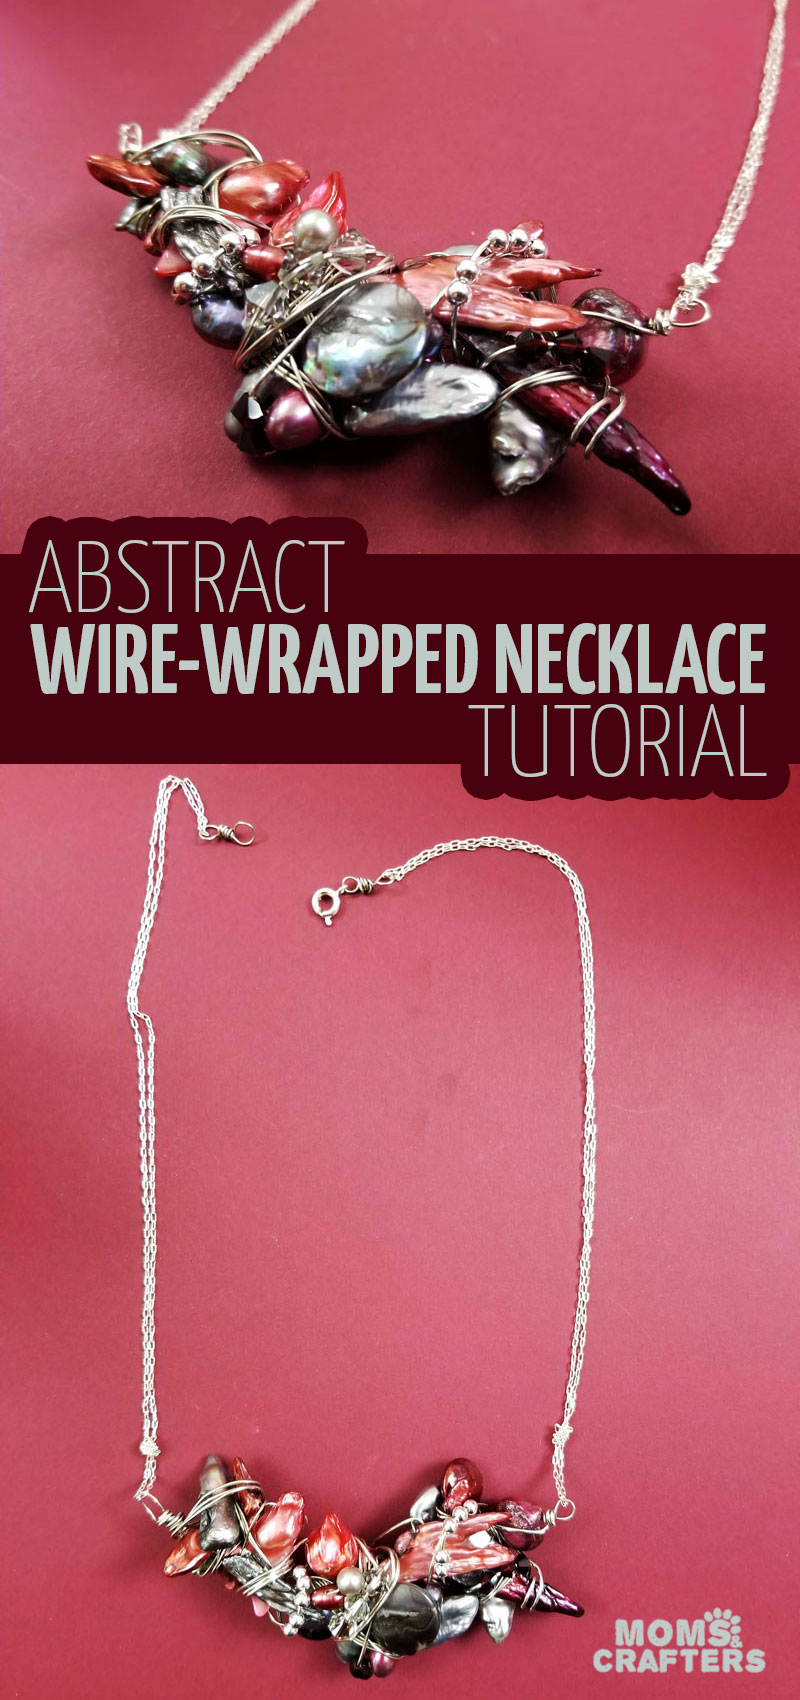 How to wrap crystals with wire * Moms and Crafters